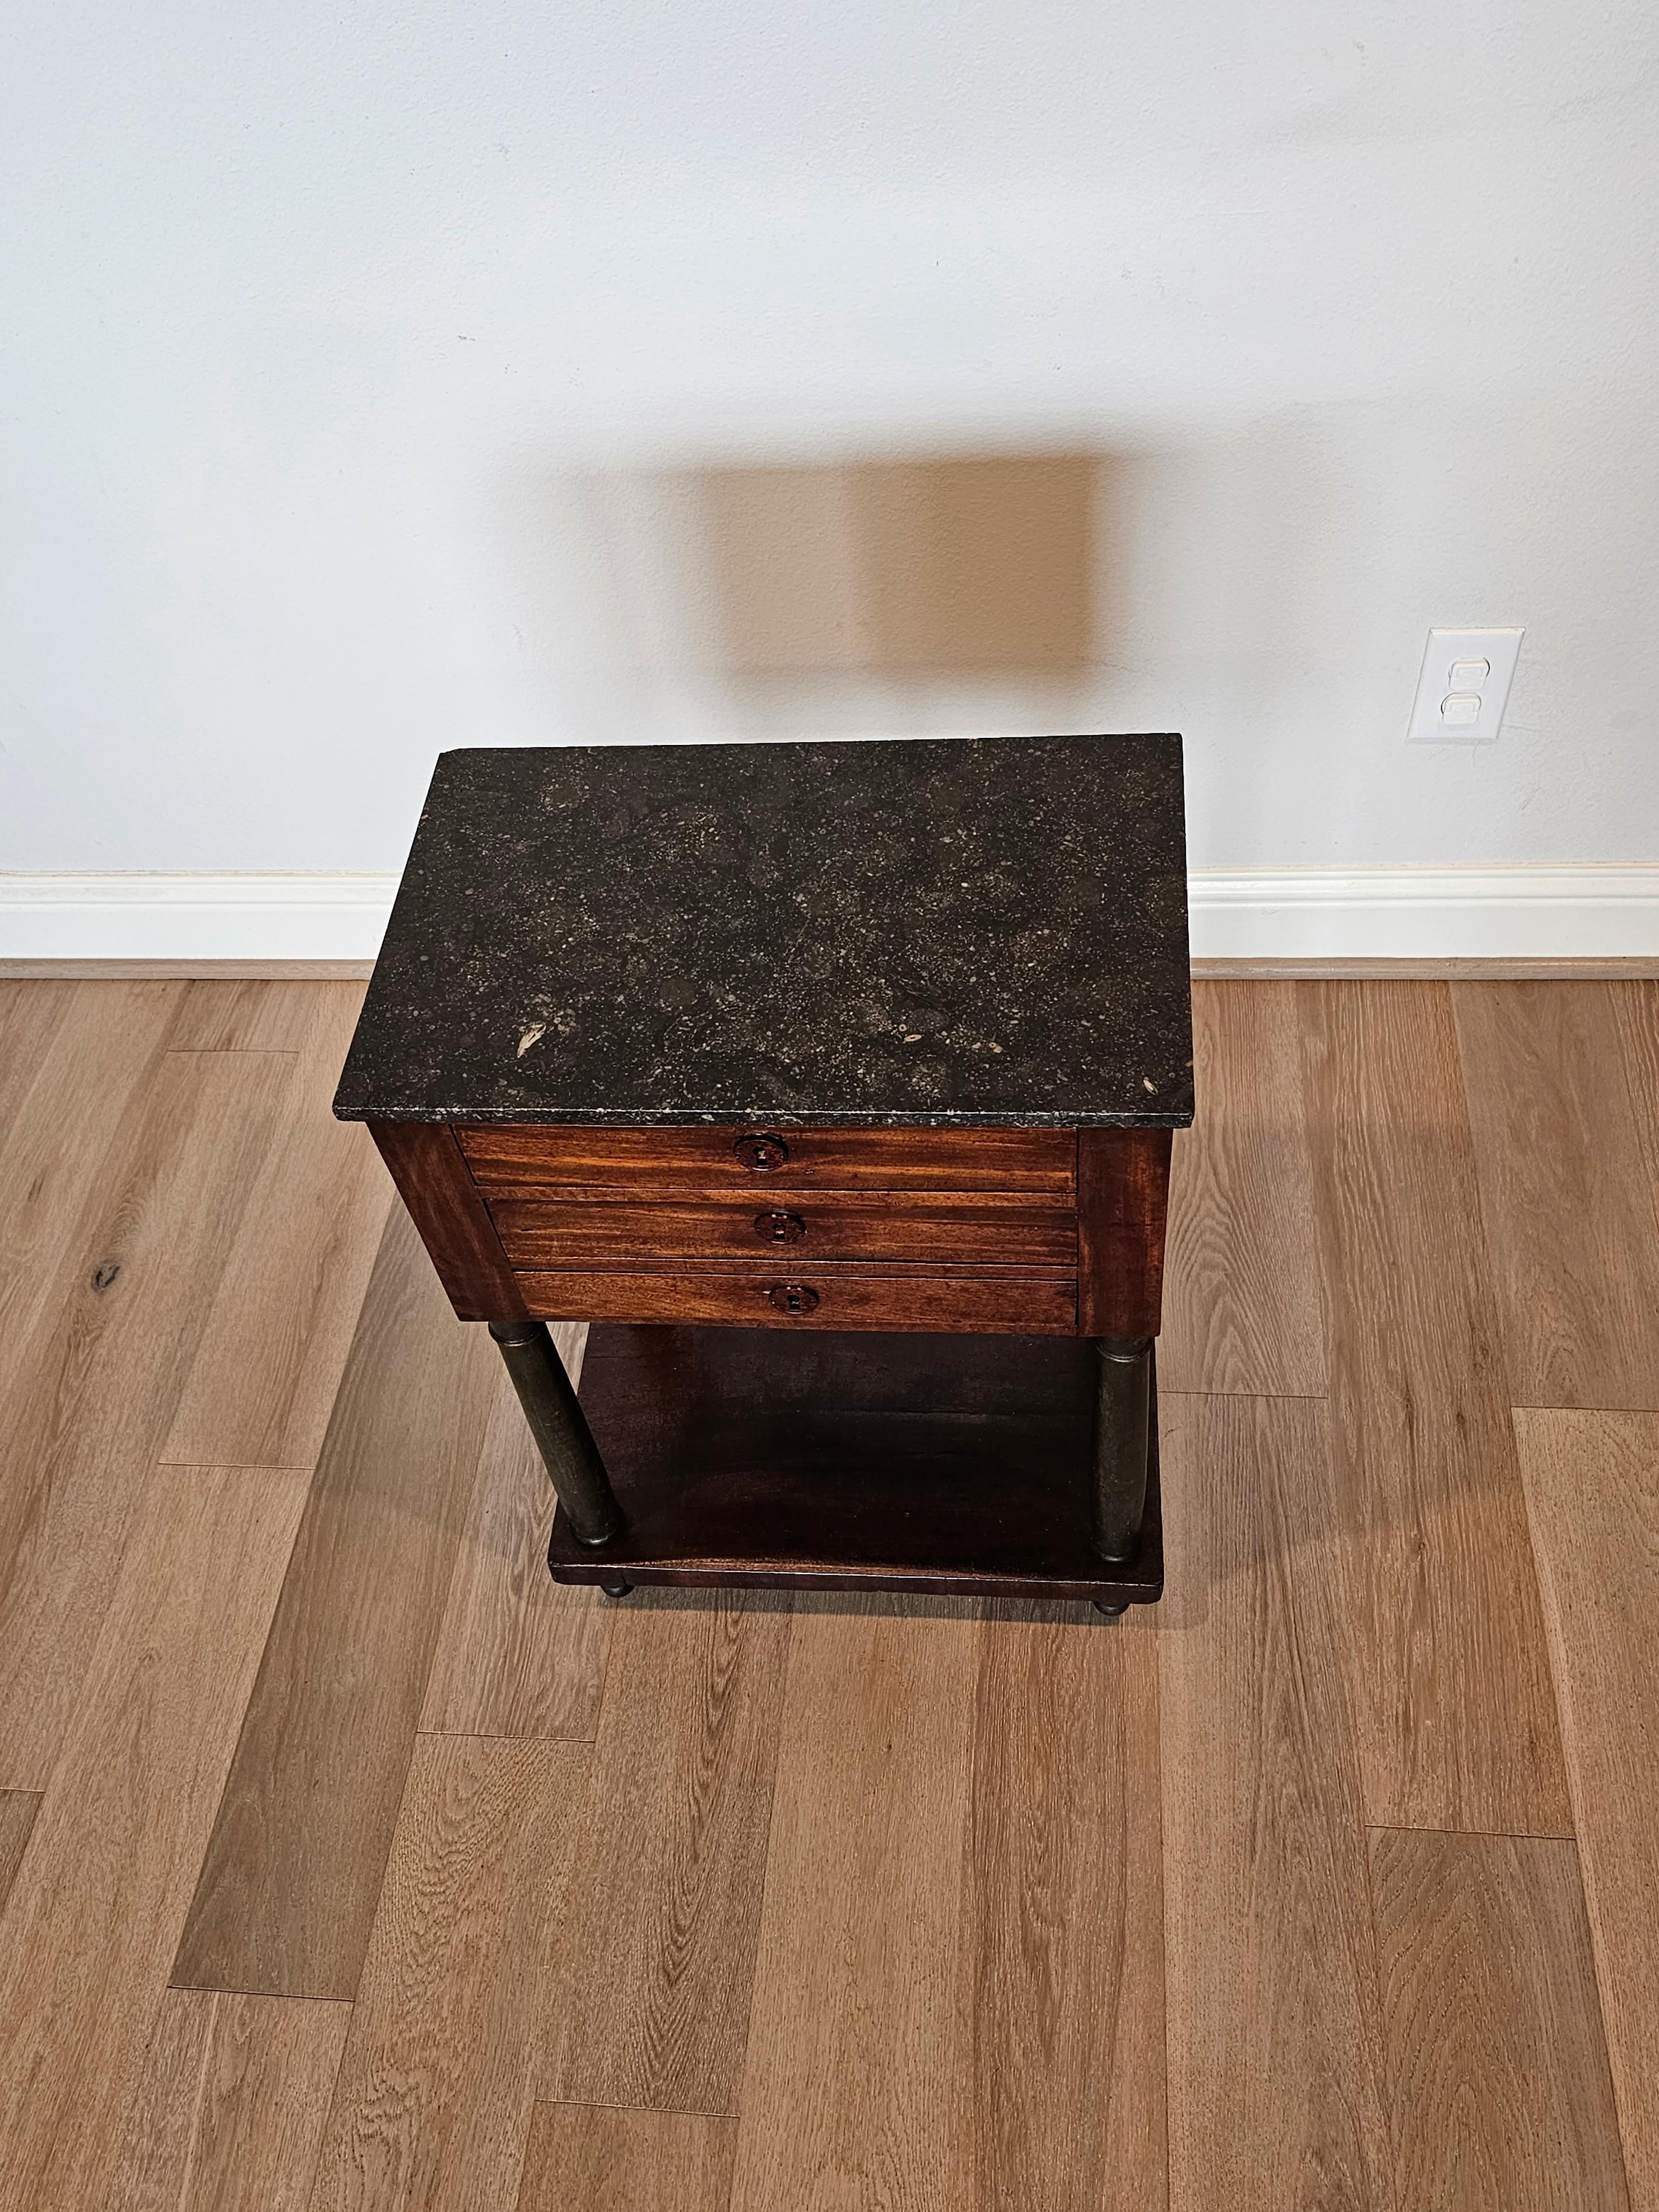 Early 19th Century French Empire Period Mahogany Nightstand End Table In Good Condition For Sale In Forney, TX